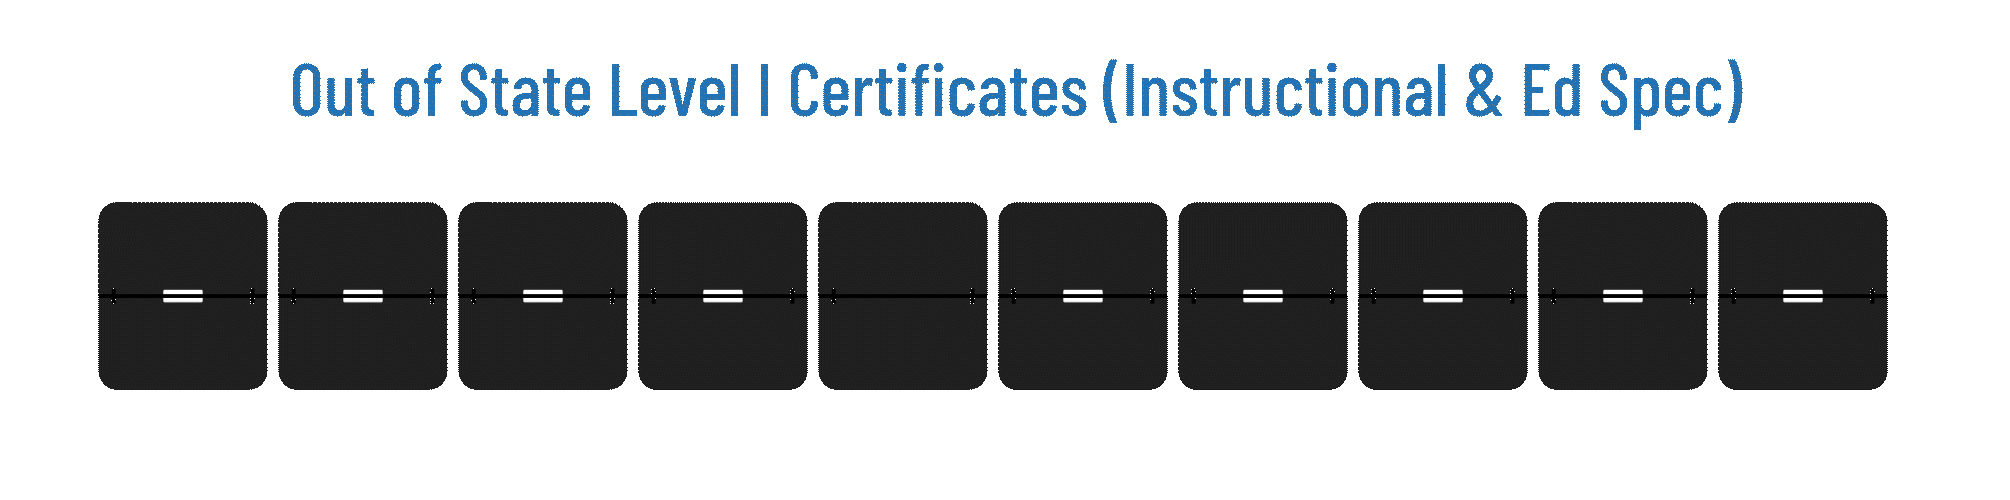 Out of State Level I Certificates (Instructional & Ed Spec) - less than 5 Weeks